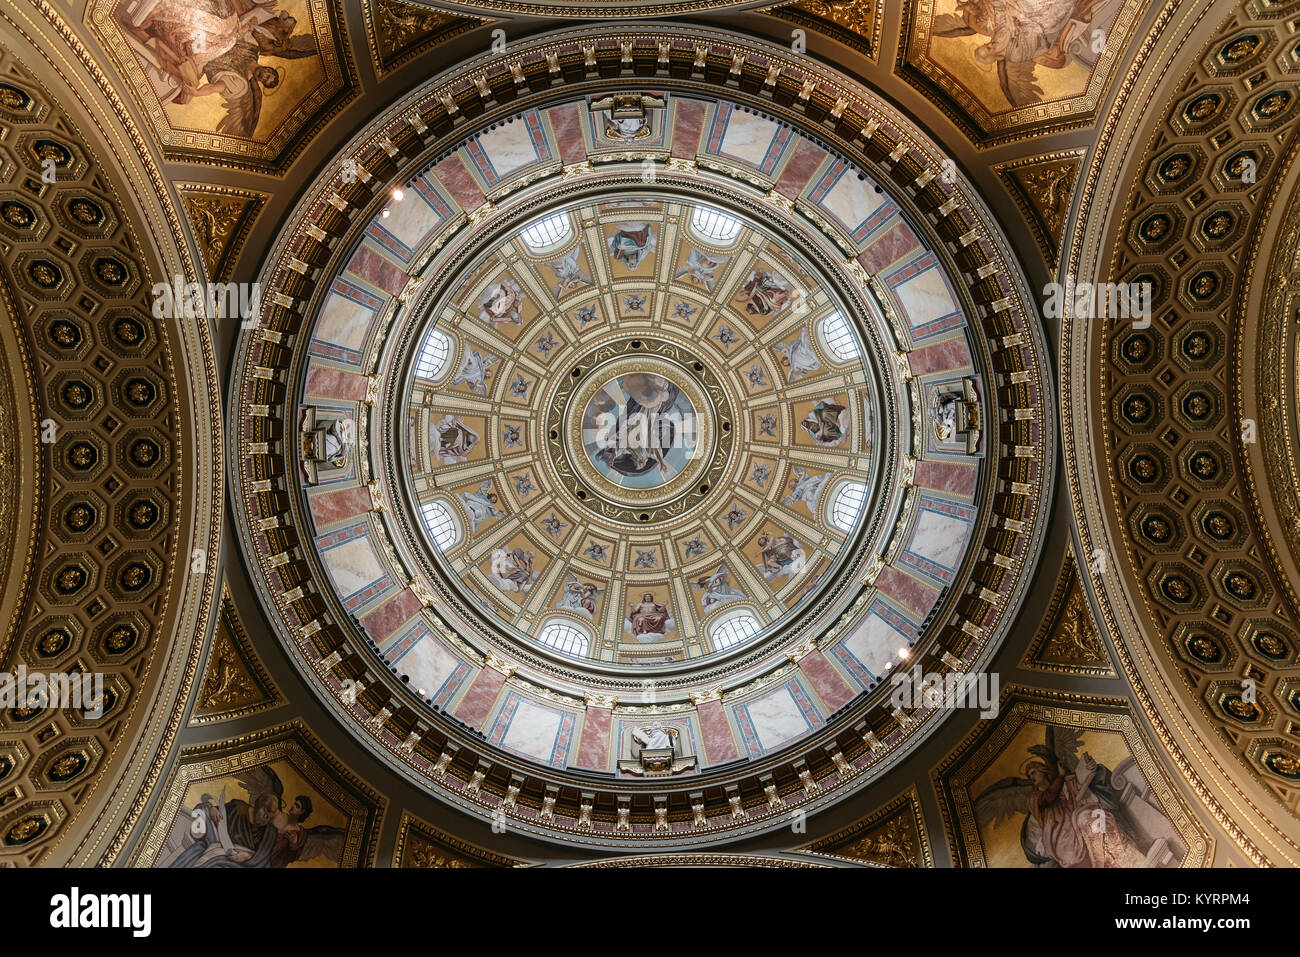 Budapest, Hungary - August 13, 2017: Low angle view of dome of St Stephen Basilica in Budapest. Interior view directly below the dome Stock Photo